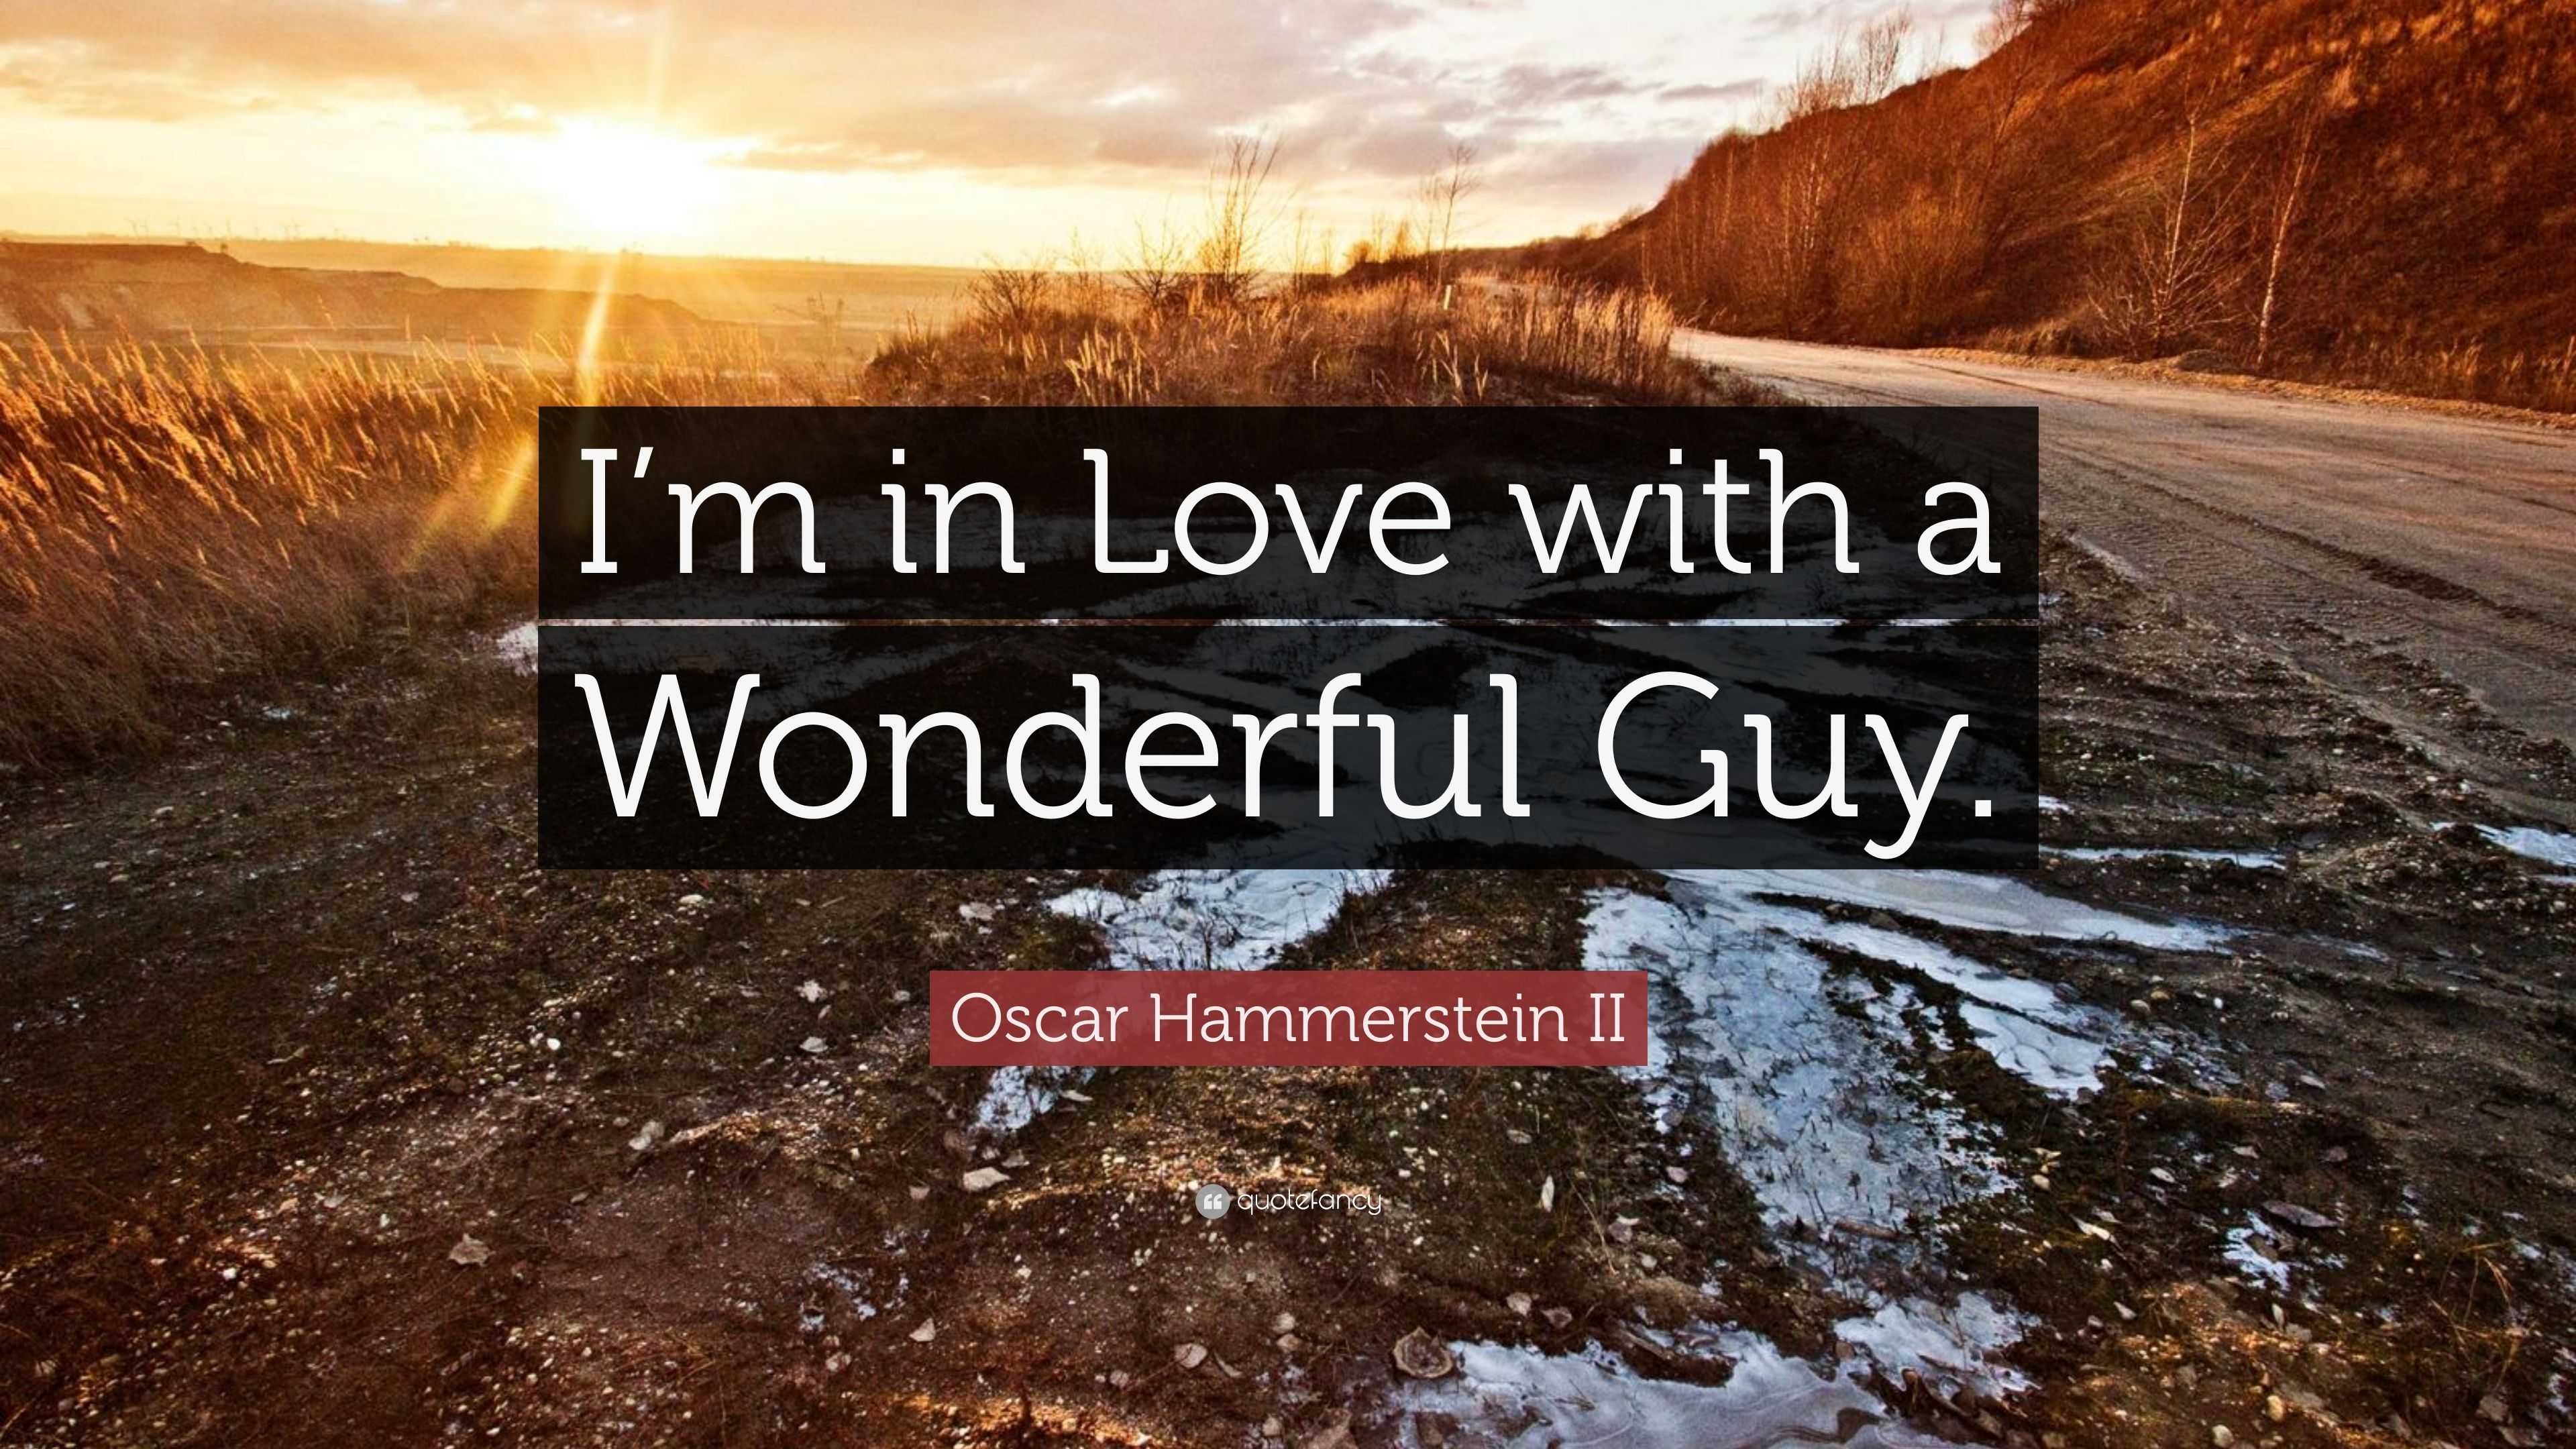 Oscar Hammerstein II Quote: “I'm in Love with a Wonderful Guy.”